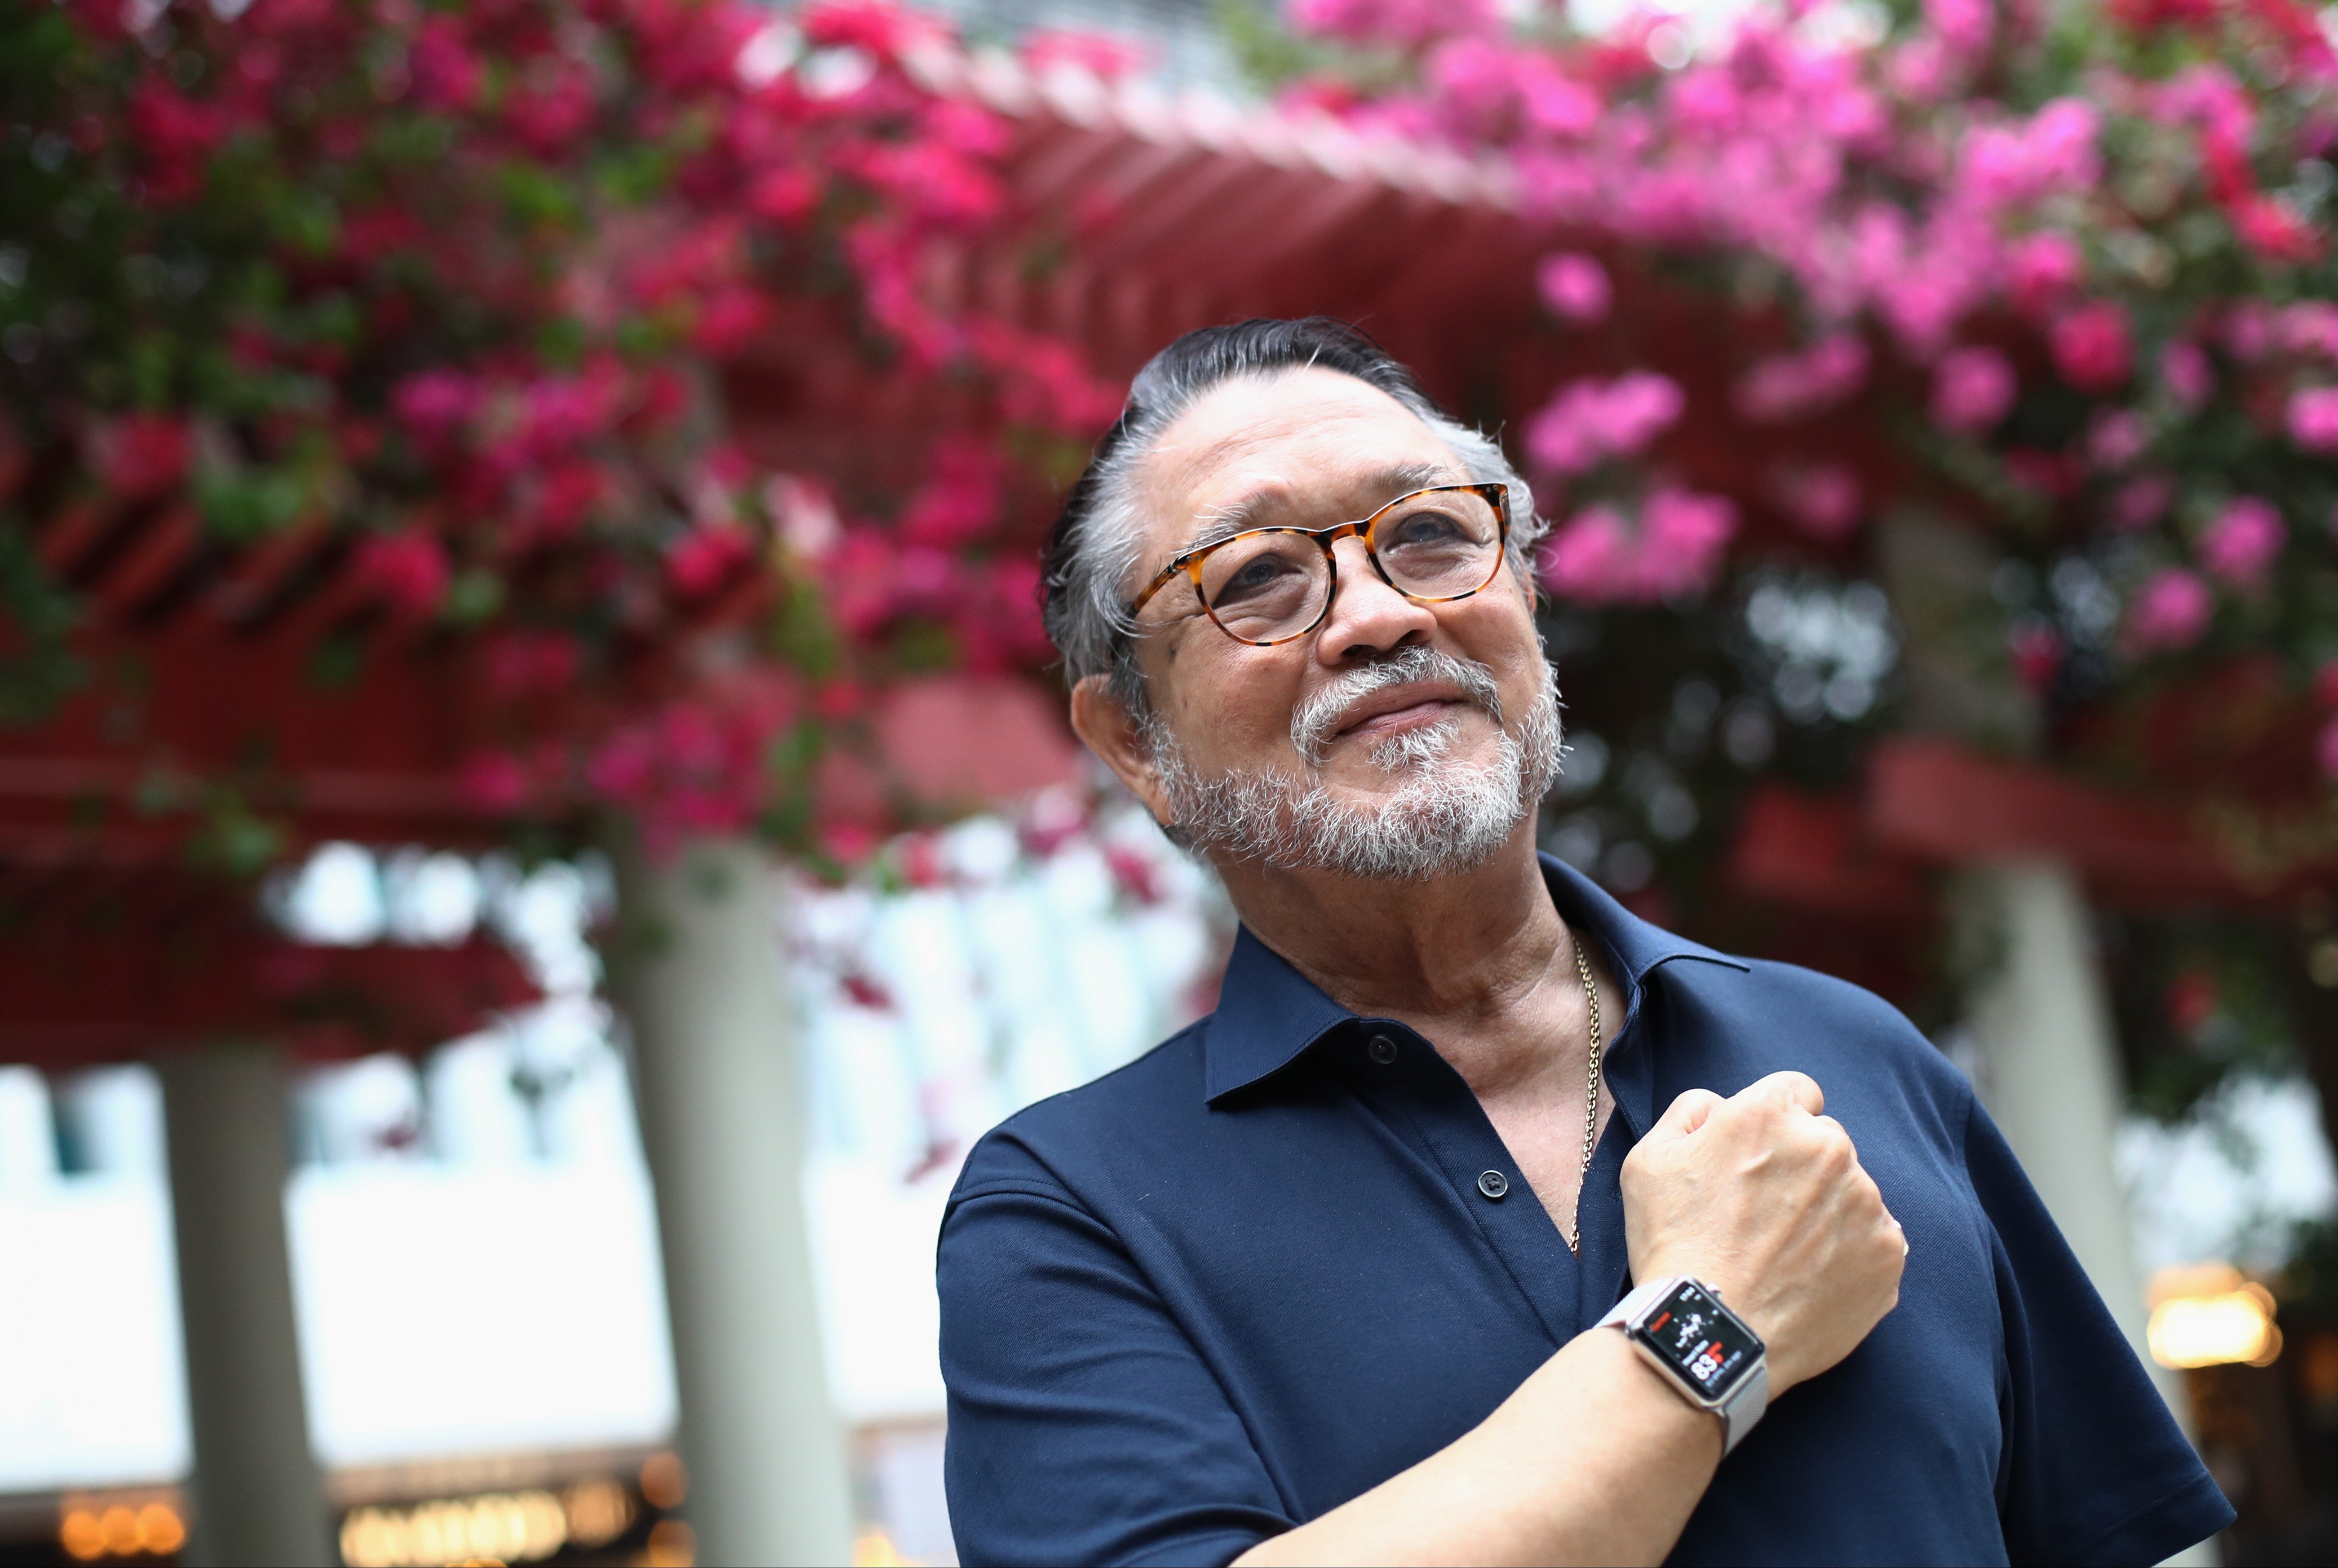 Gaston D'Aquino, a 76-year-old Hong Kong diamond trader, describes how his Apple Watch alerted him to a heart condition that saved his life. Photo: Nora Tam